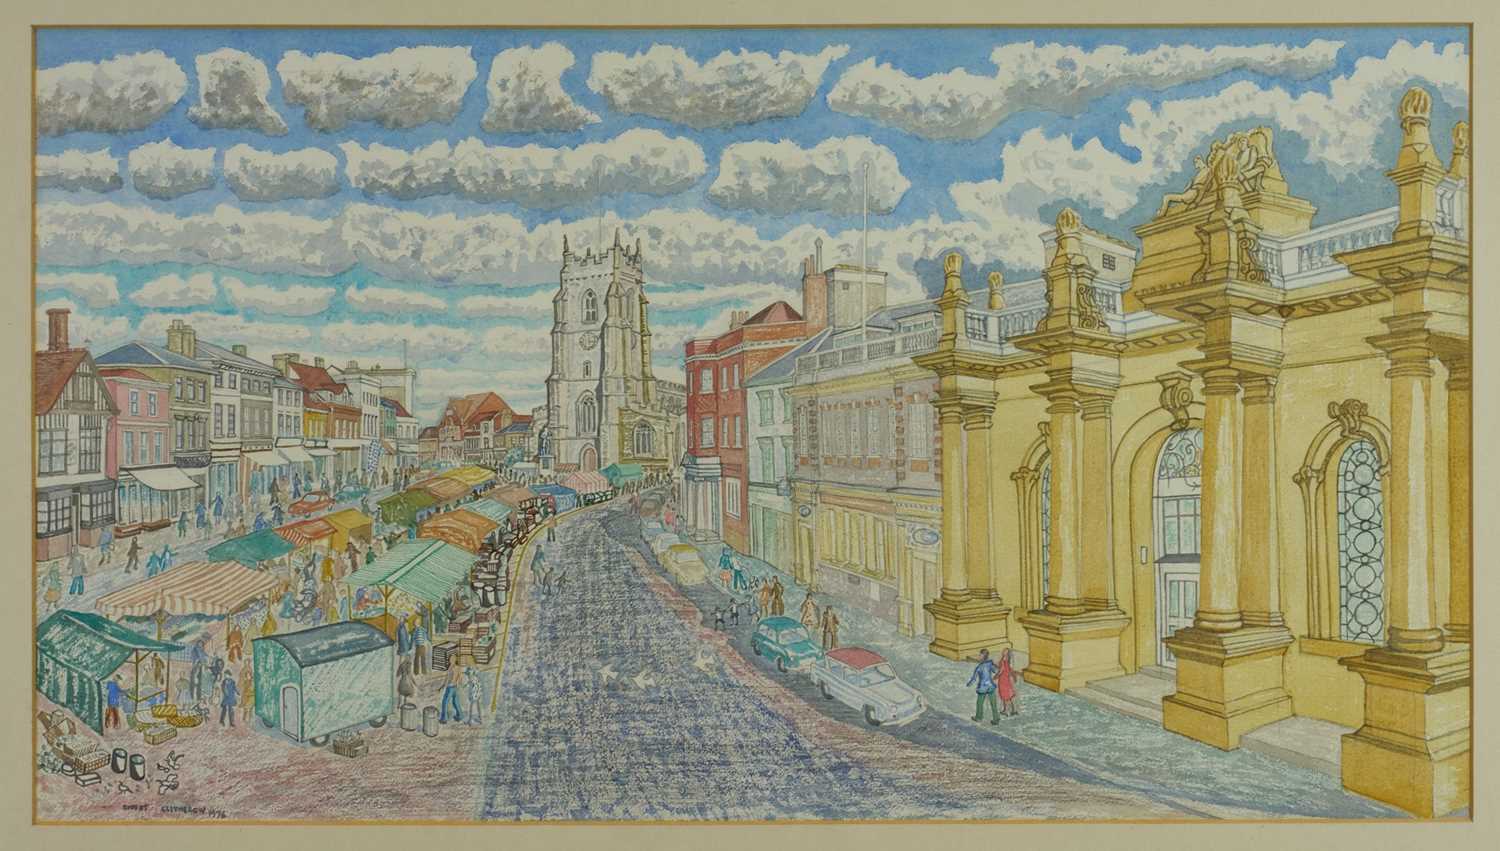 Lot 1045 - Robert Clitherow (b.1942) watercolour on paper - Market Hill, Sudbury, signed and dated 1976, Gainsborough's House 2007 Exhibition label verso, 41cm x 74cm, in glazed frame